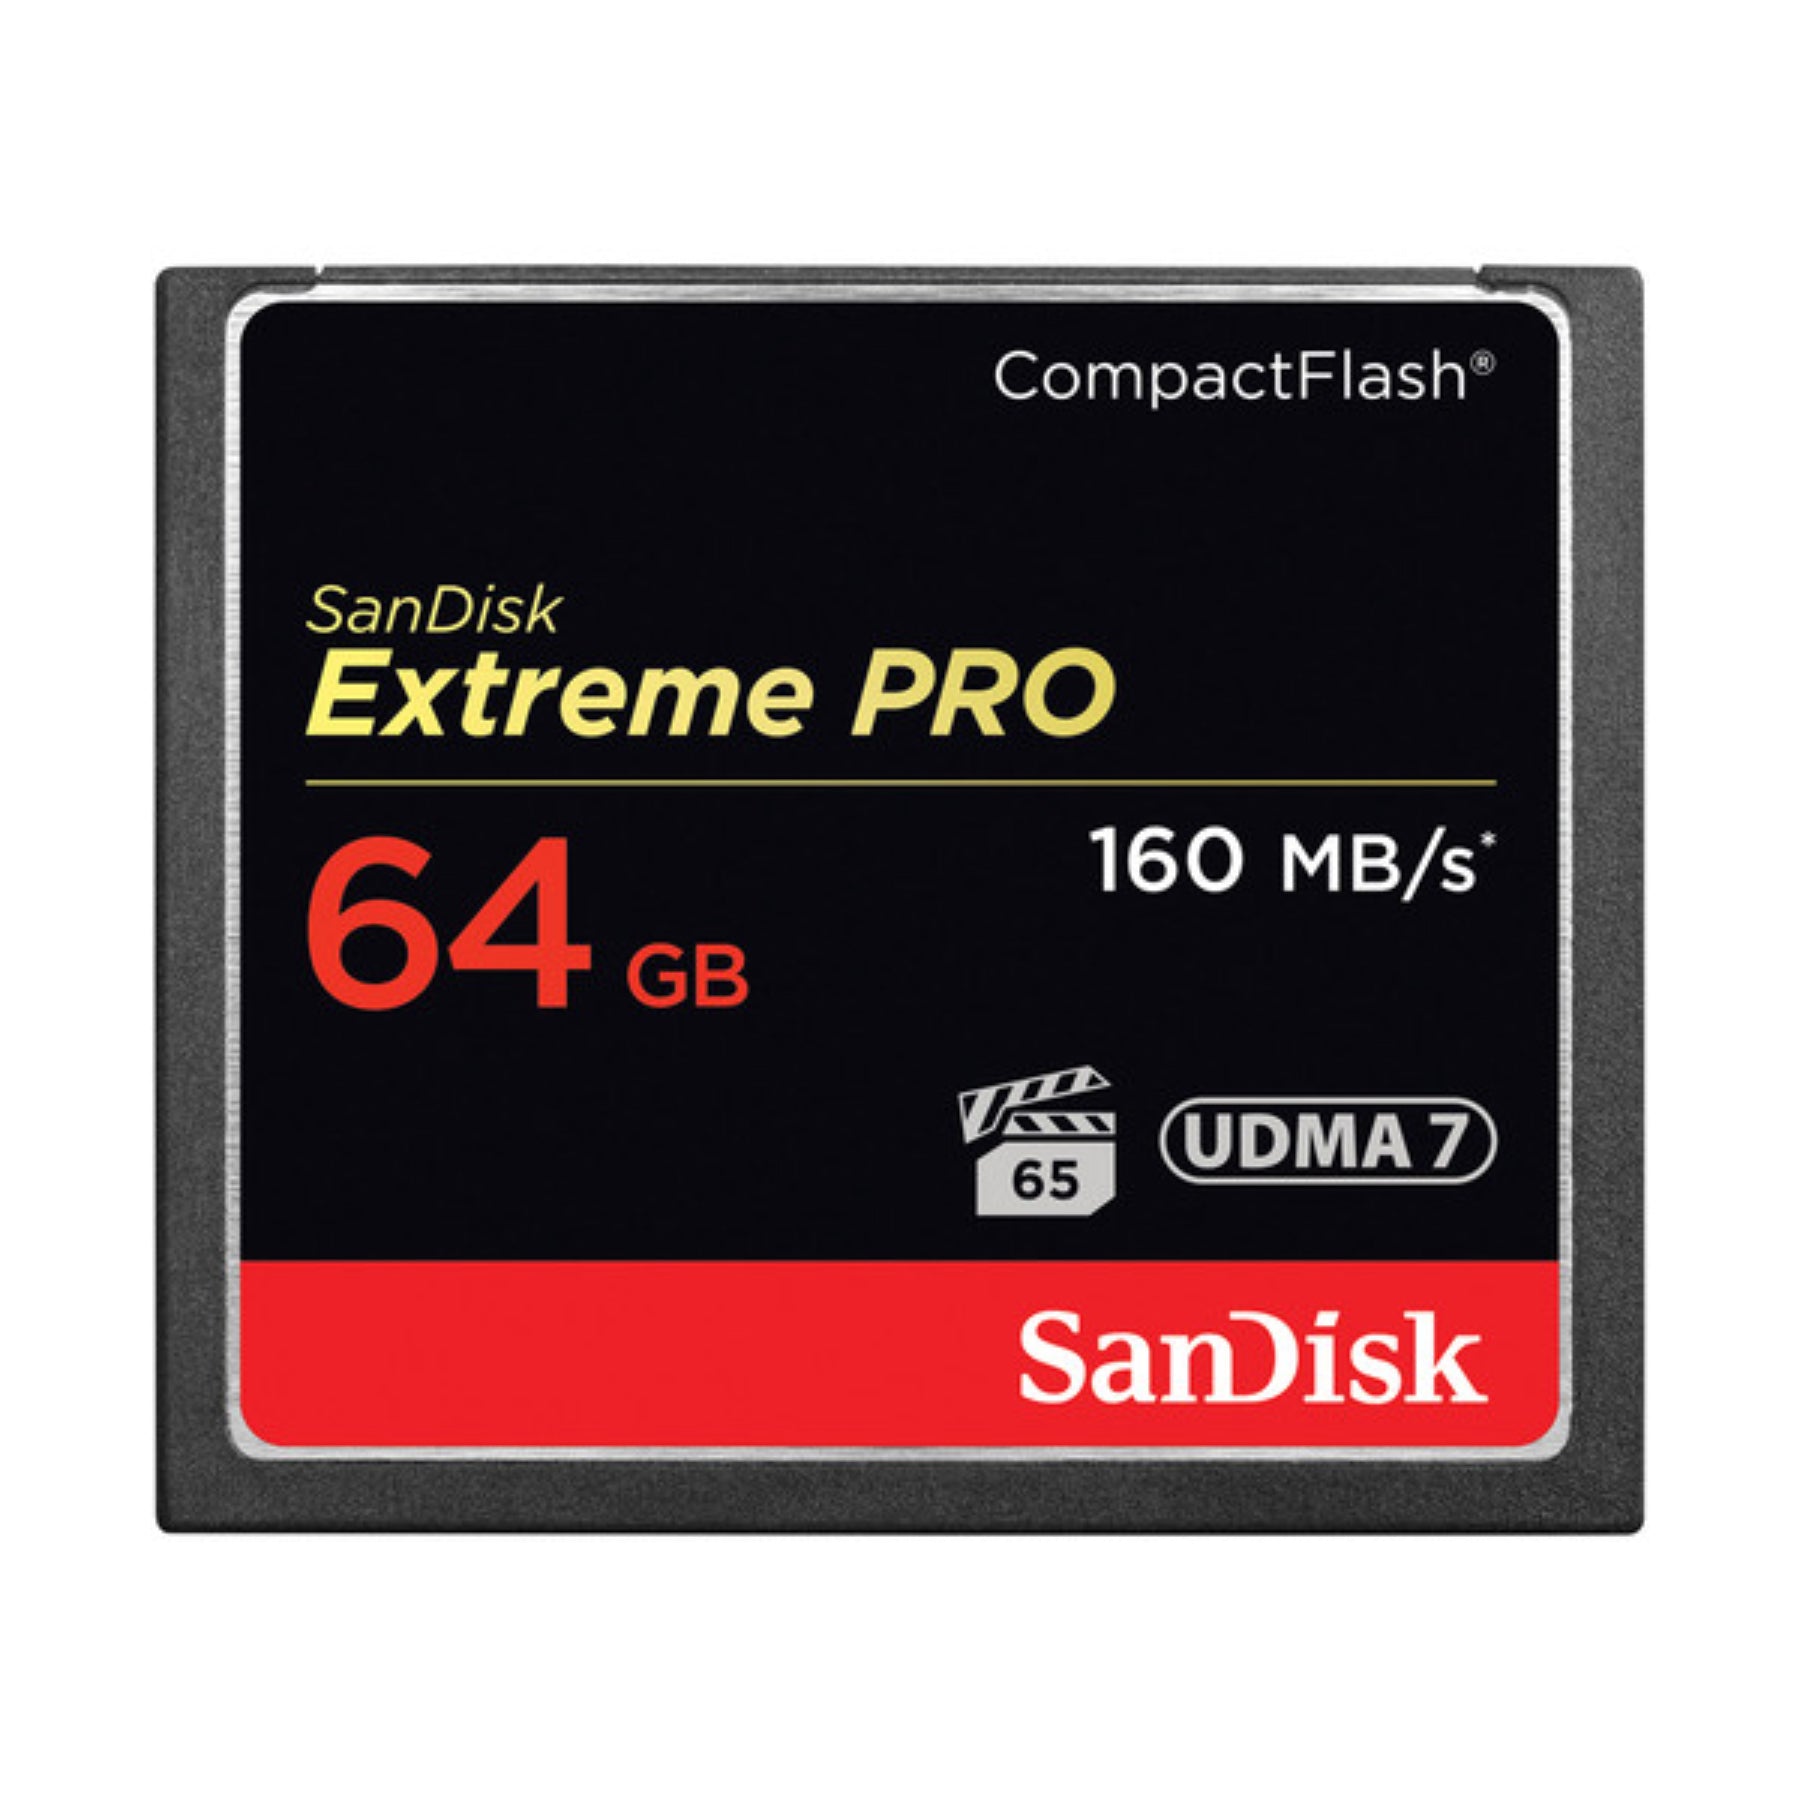 SanDisk 64GB Extreme Pro CompactFlash Memory Card for hire